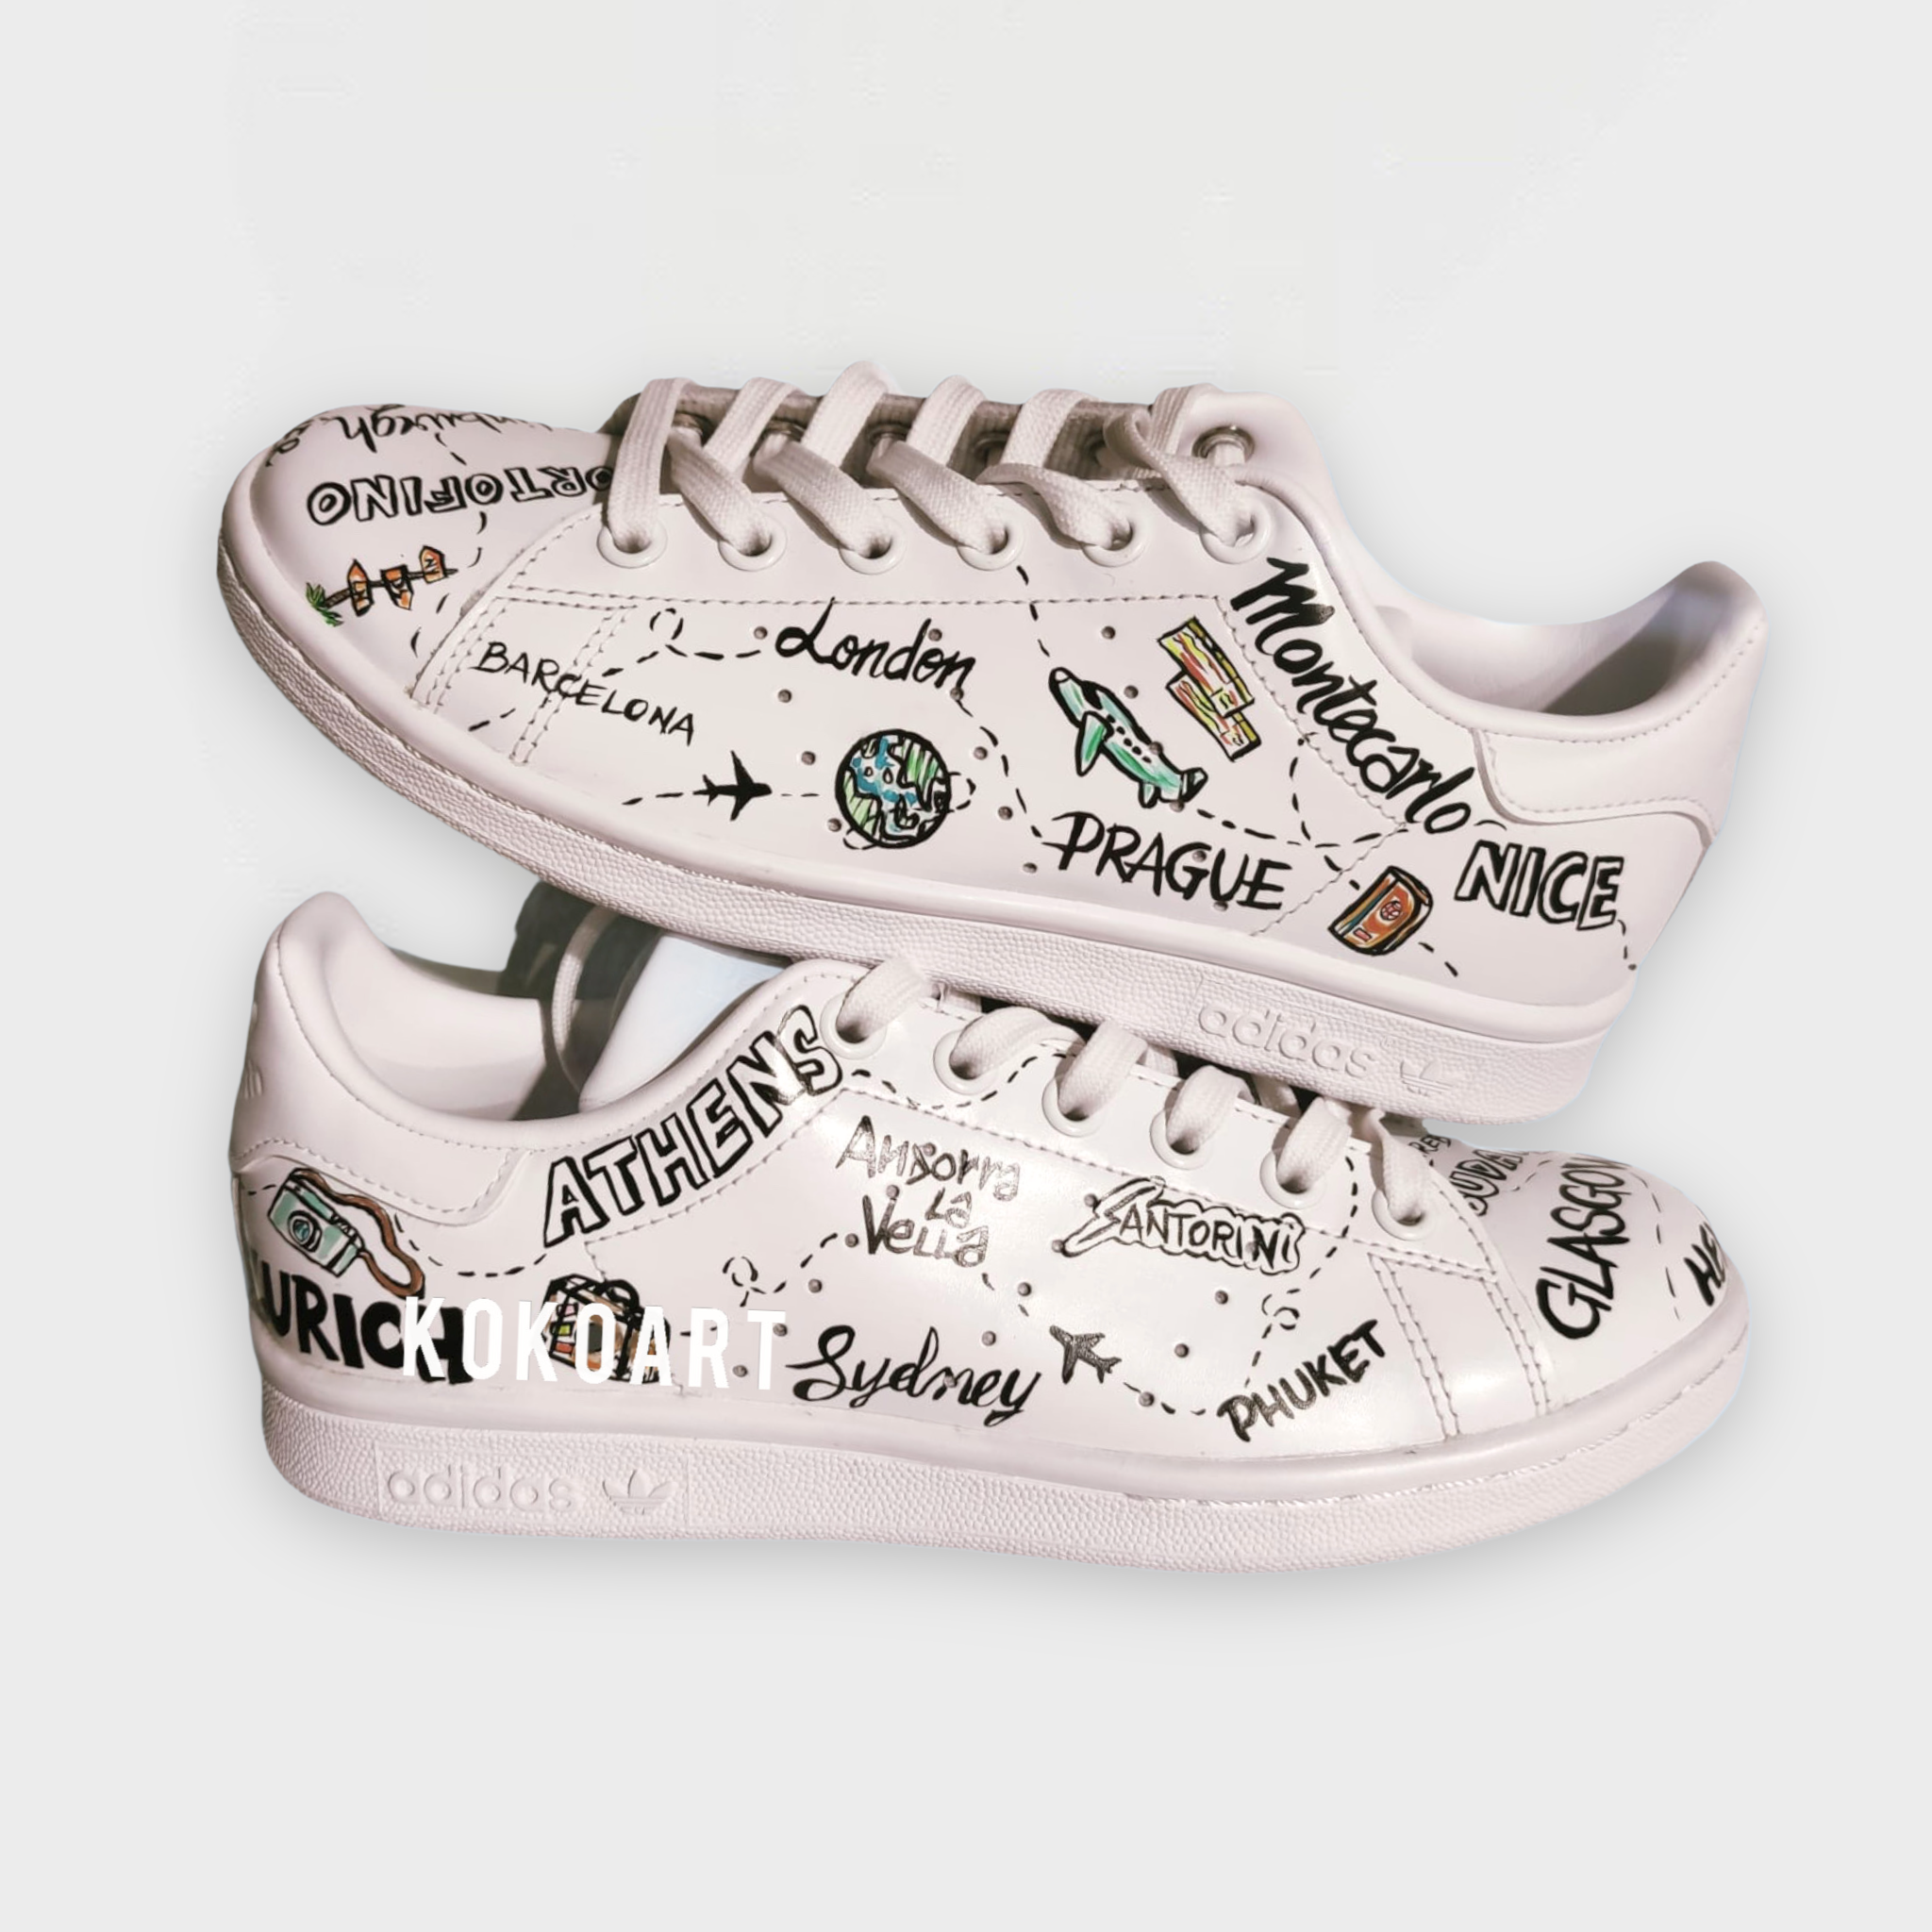 Stan Smith Hand Painted Travel